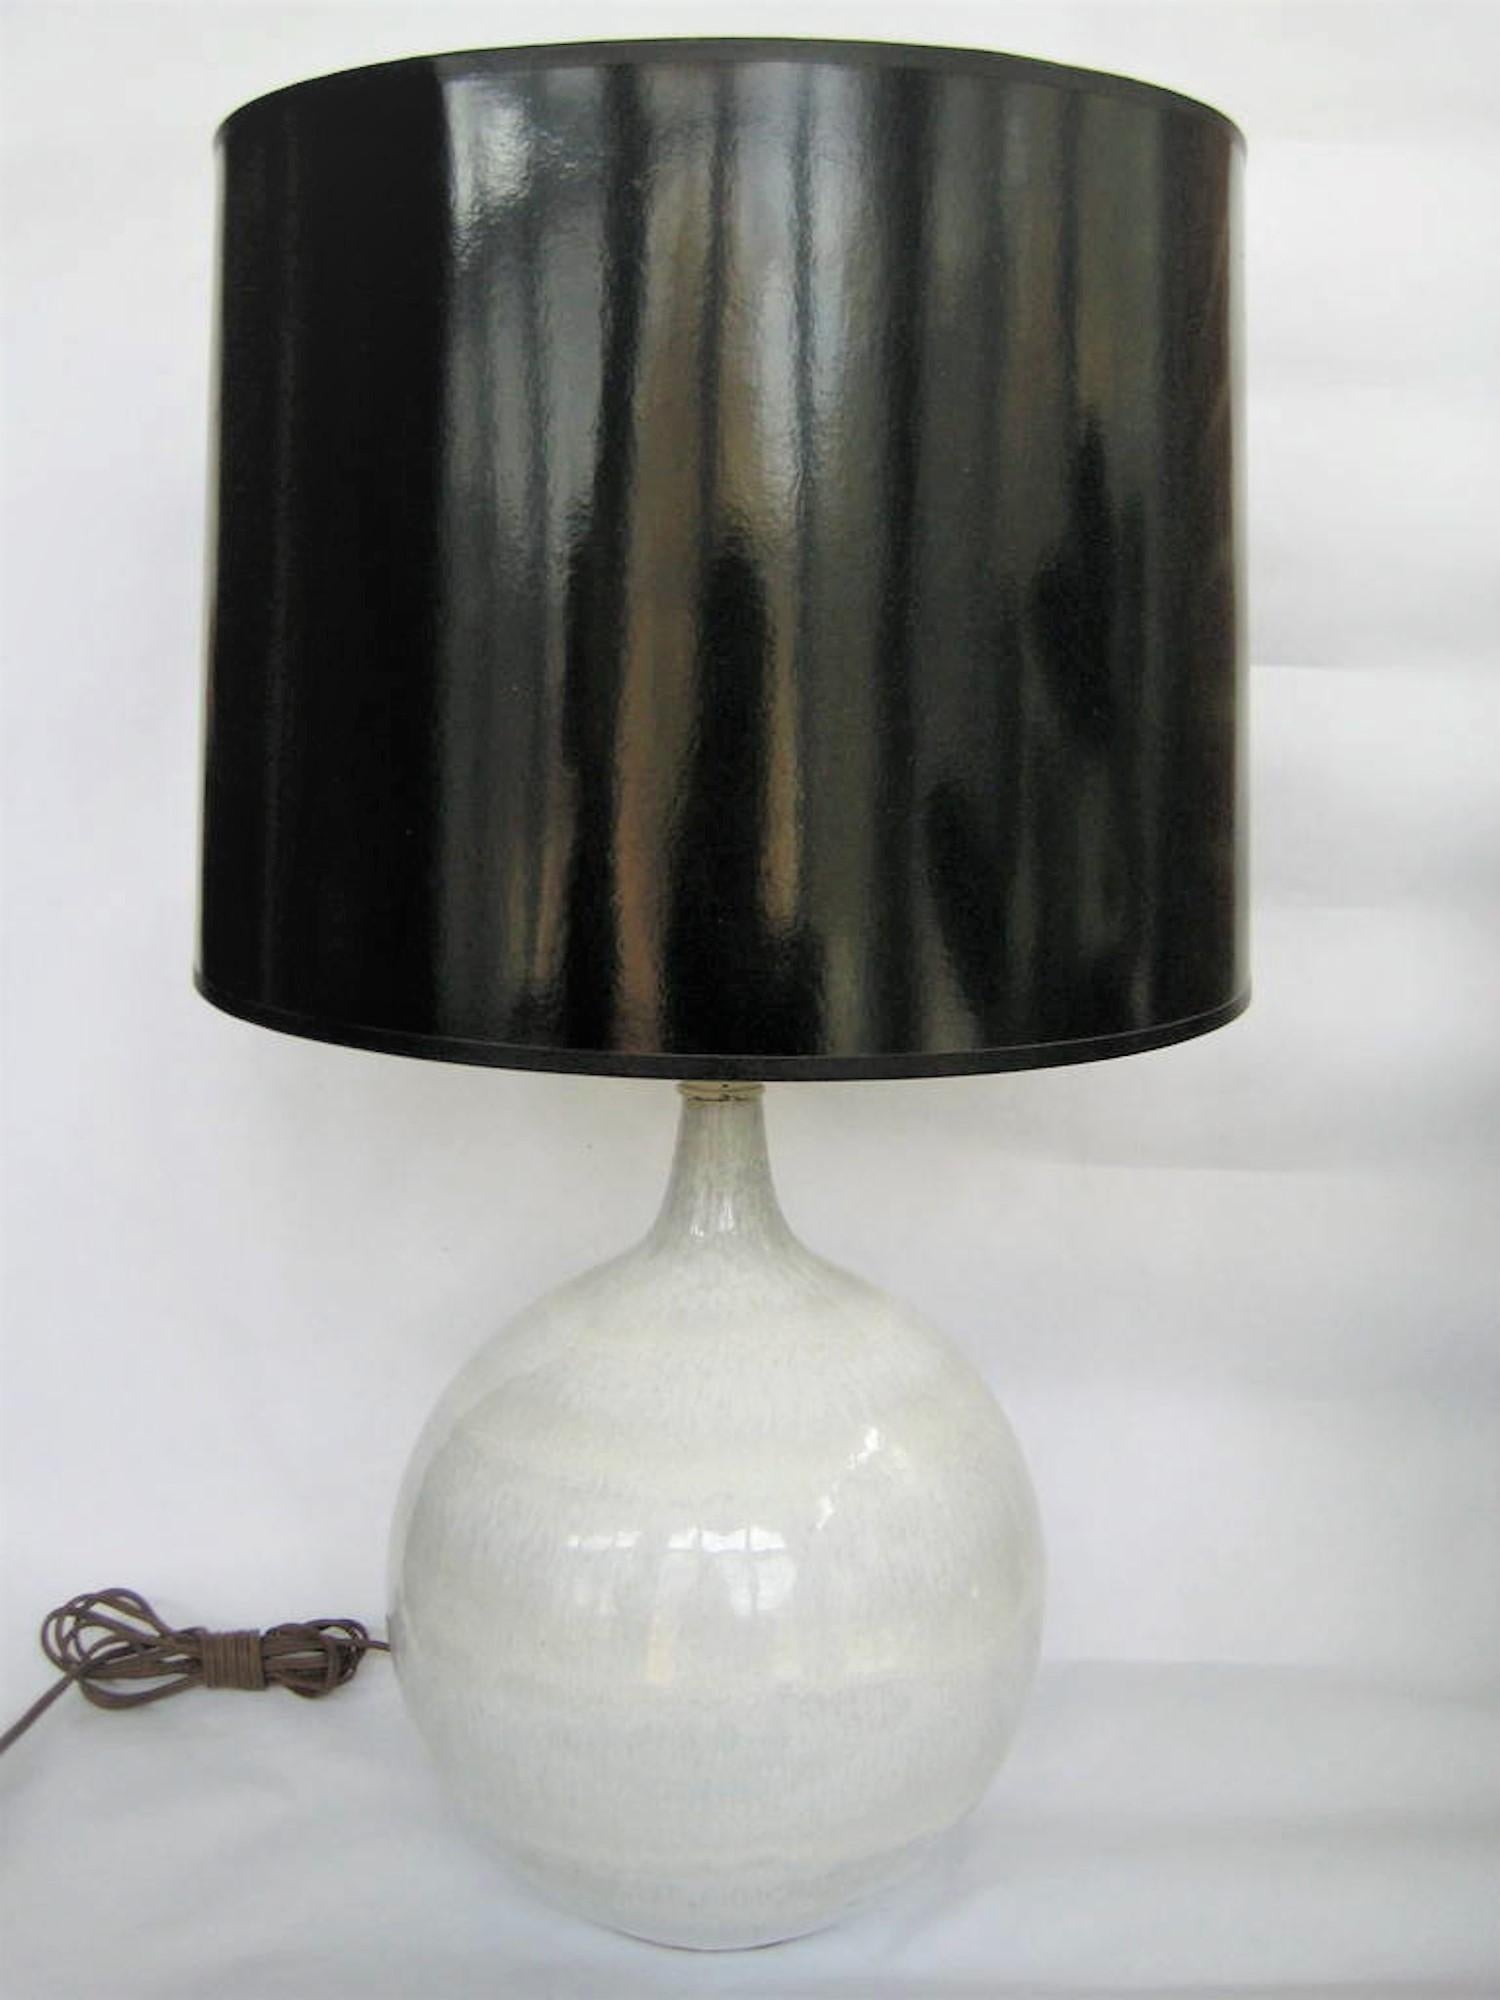 Midcentury 1960s glazed pottery table lamp. Heavy substantial weight pottery base. Very good original condition.

Measurements:
Complete height bottom to finial 25.75

Width of base: 9.5